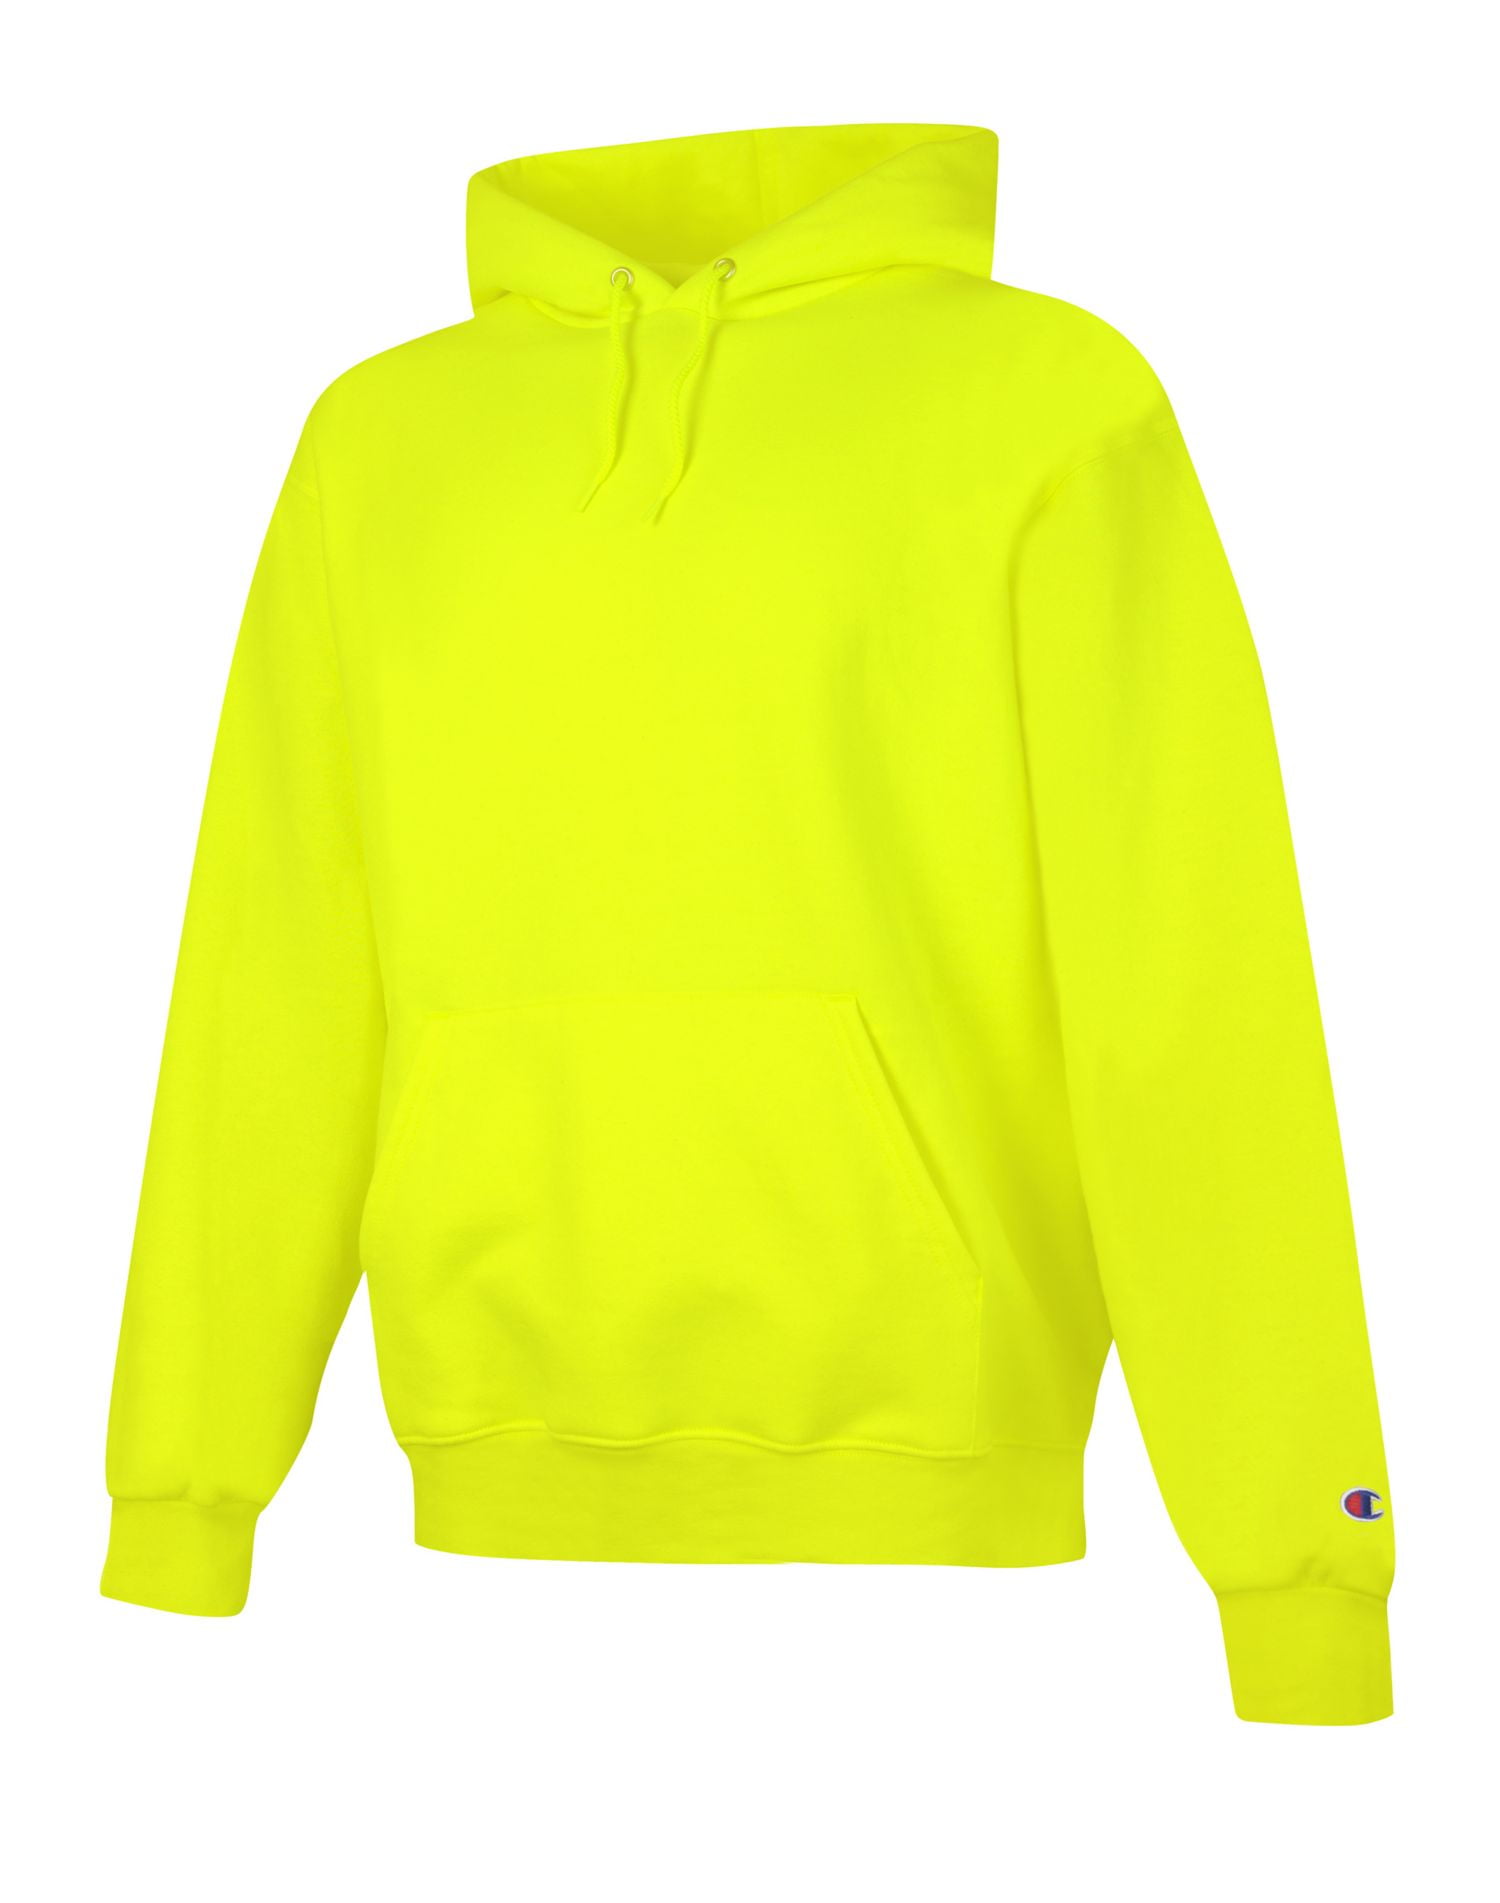 Green, XL oz. Pullover (S700) Eco 9 Hood Champion Safety